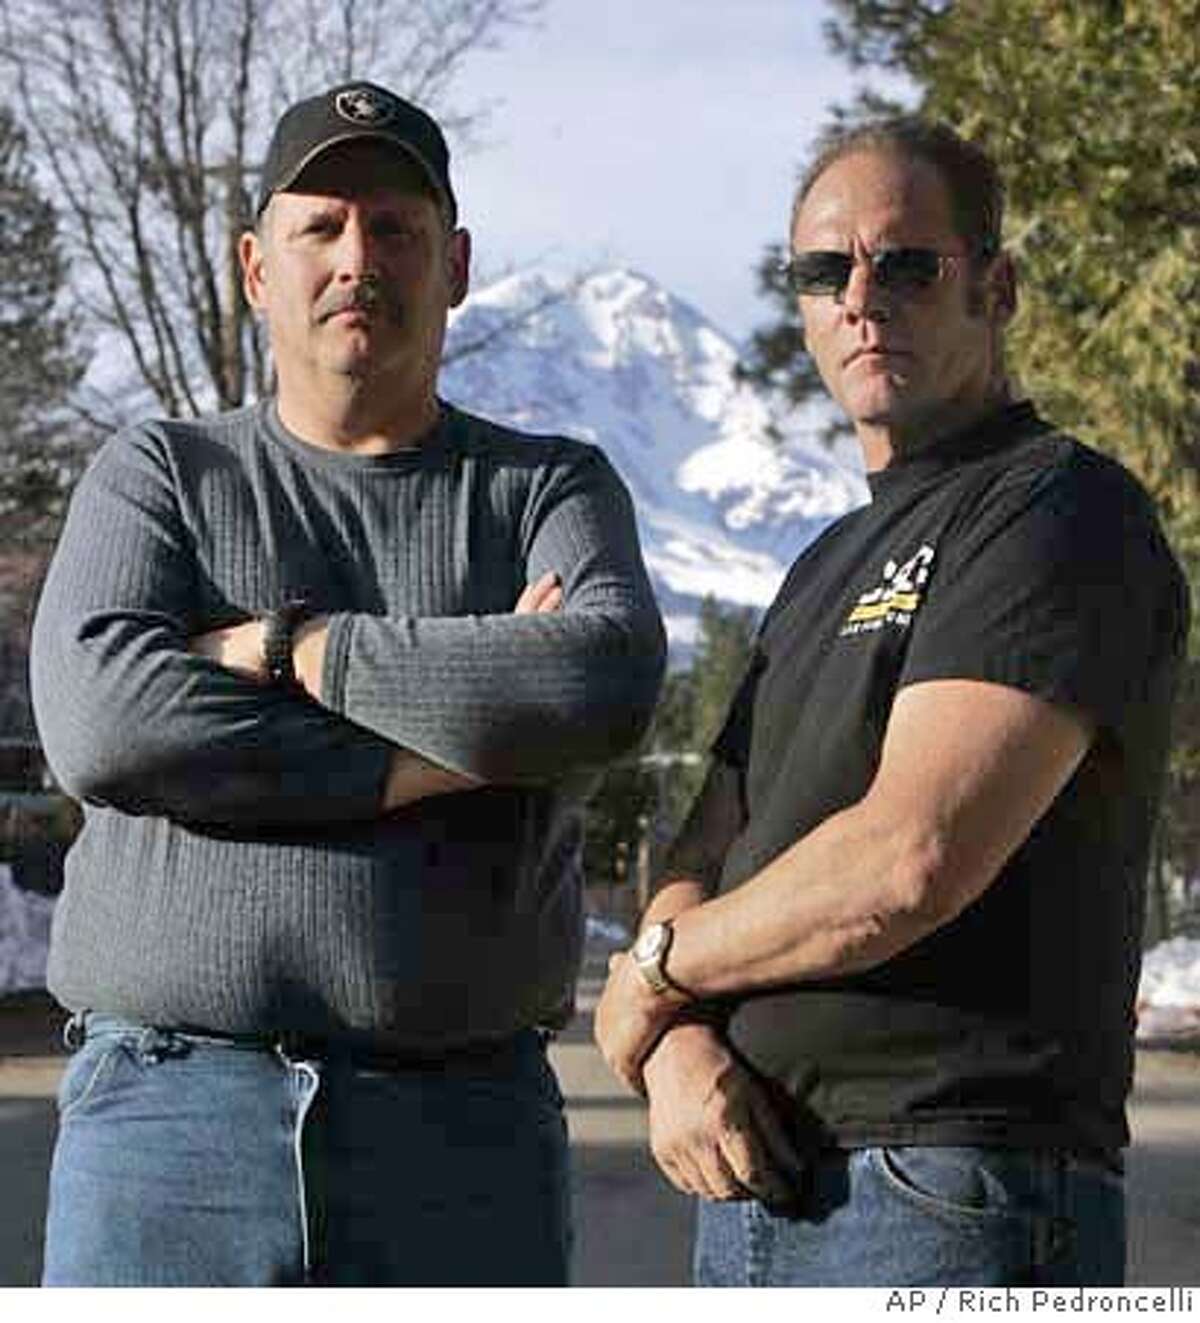 ###Live Caption:With Mt. Shasta looming in the background, Randy and Martin Prinz are seen in McCloud, Calif., Thursday, Feb. 28, 2008. The life-long residents of McCloud , who both used to work at the local lumber mill before it closed in 2003, have mix feelings on a proposed water bottling plant. Randy wants a better deal with the Nestle Waters North America, Inc., then the current one being proposed, while Martin opposes the plant saying he doesn't see how it will benefit the town. (AP Photo/Rich Pedroncelli)###Caption History:With Mt. Shasta looming in the background, Randy and Martin Prinz are seen in McCloud, Calif., Thursday, Feb. 28, 2008. The life-long residents of McCloud , who both used to work at the local lumber mill before it closed in 2003, have mix feelings on a proposed water bottling plant. Randy wants a better deal with the Nestle Waters North America, Inc., then the current one being proposed, while Martin opposes the plant saying he doesn't see how it will benefit the town. (AP Photo/Rich Pedroncelli)###Notes:###Special Instructions: